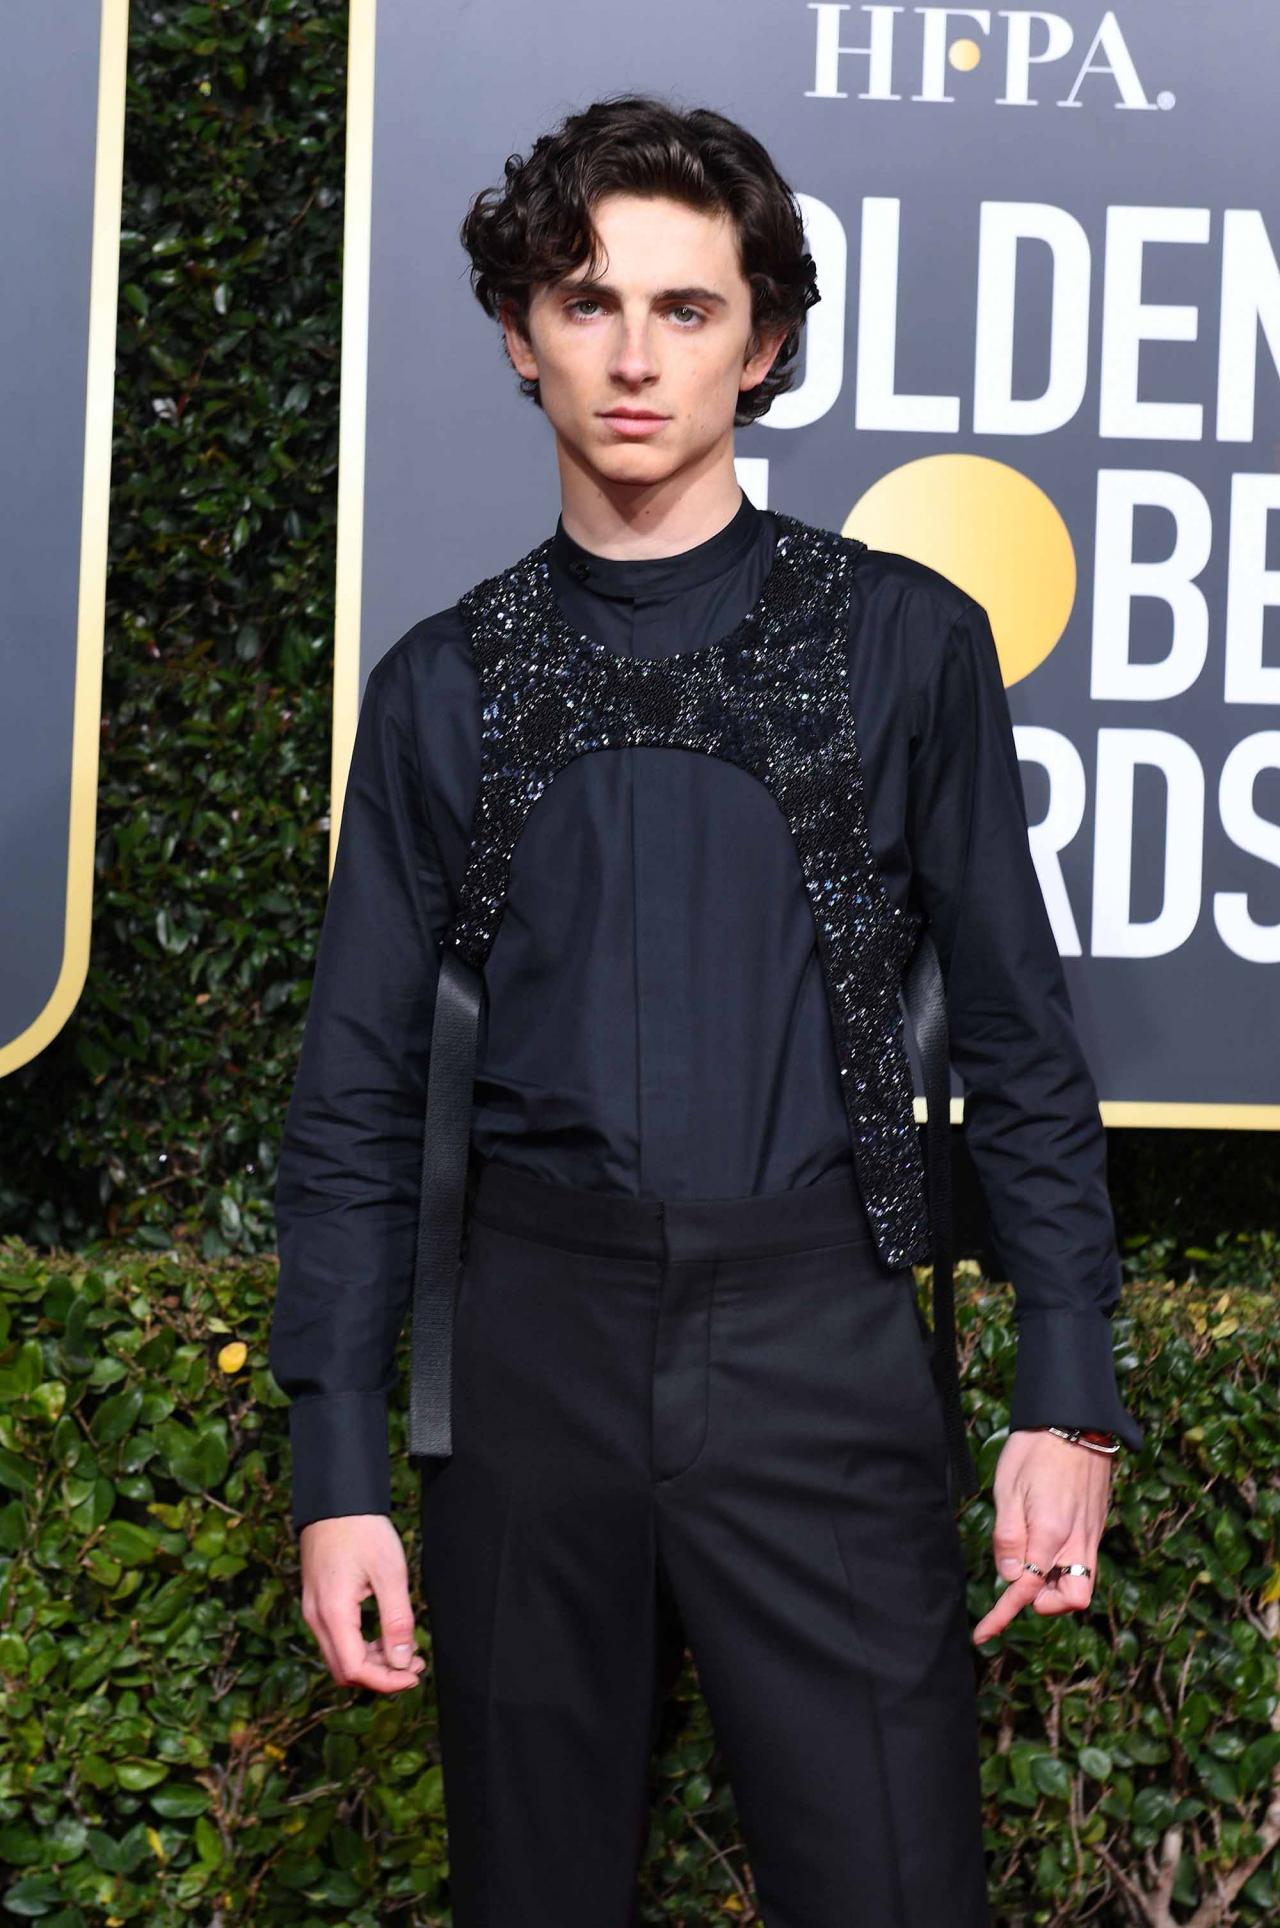 Best Actress in a Supporting Role in any Motion Picture for "Beautiful Boy" nominee Timothee Chalamet arrives for the 76th annual Golden Globe Awards on January 6, 2019, at the Beverly Hilton hotel in Beverly Hills, California. (Photo by VALERIE MACON / AFP)        (Photo credit should read VALERIE MACON/AFP via Getty Images)